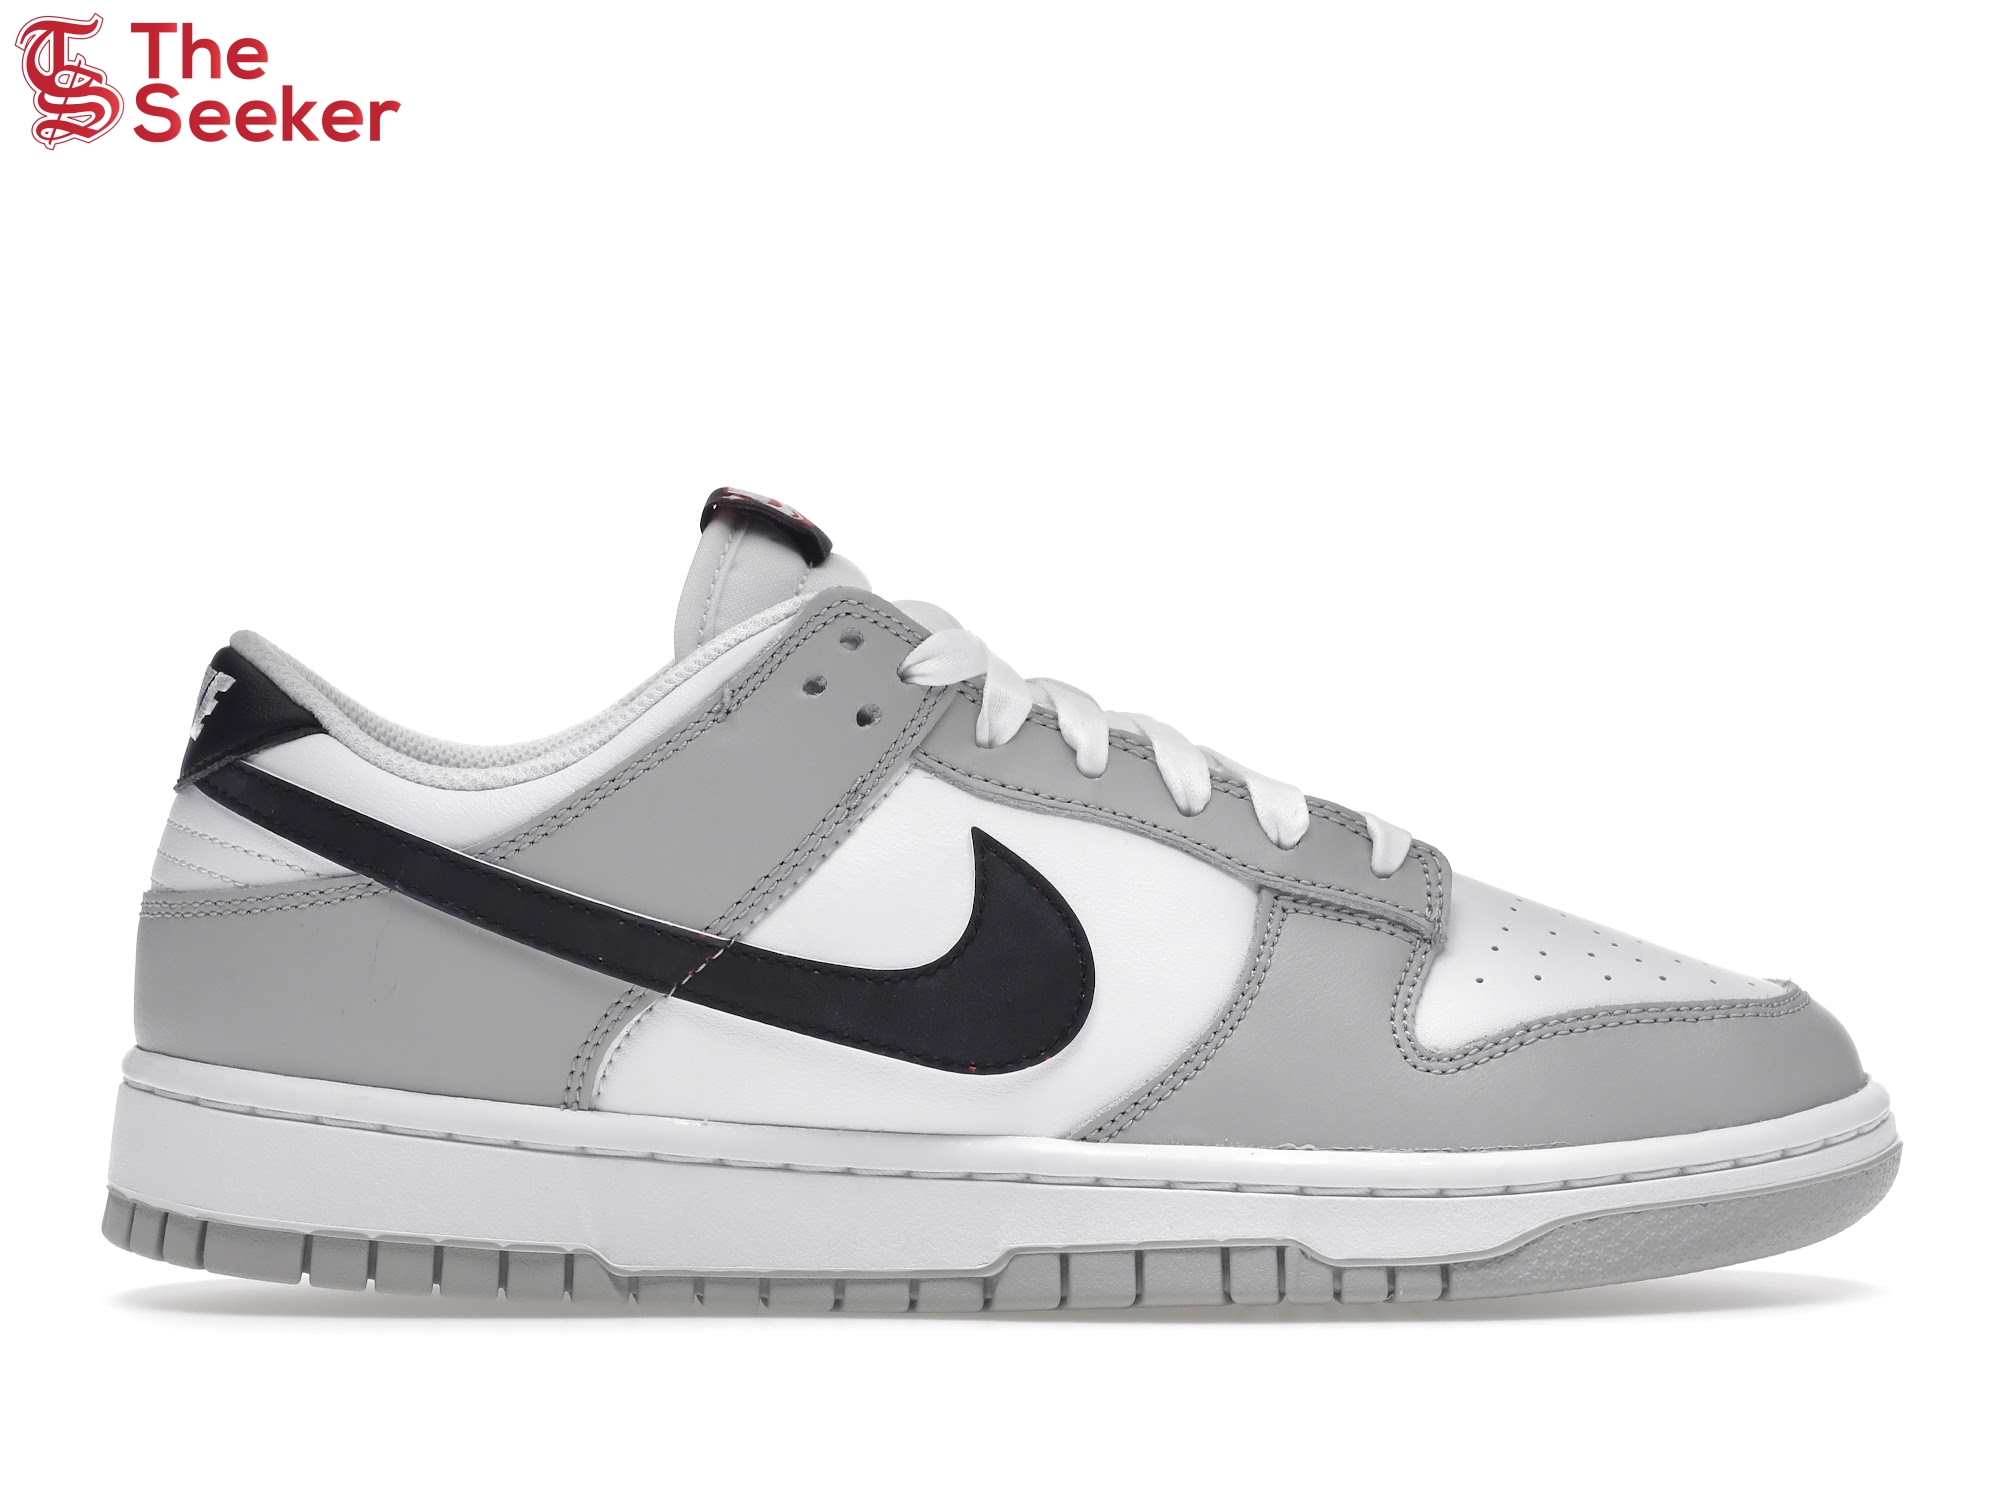 Nike Dunk Low SE Lottery Pack Grey Fog